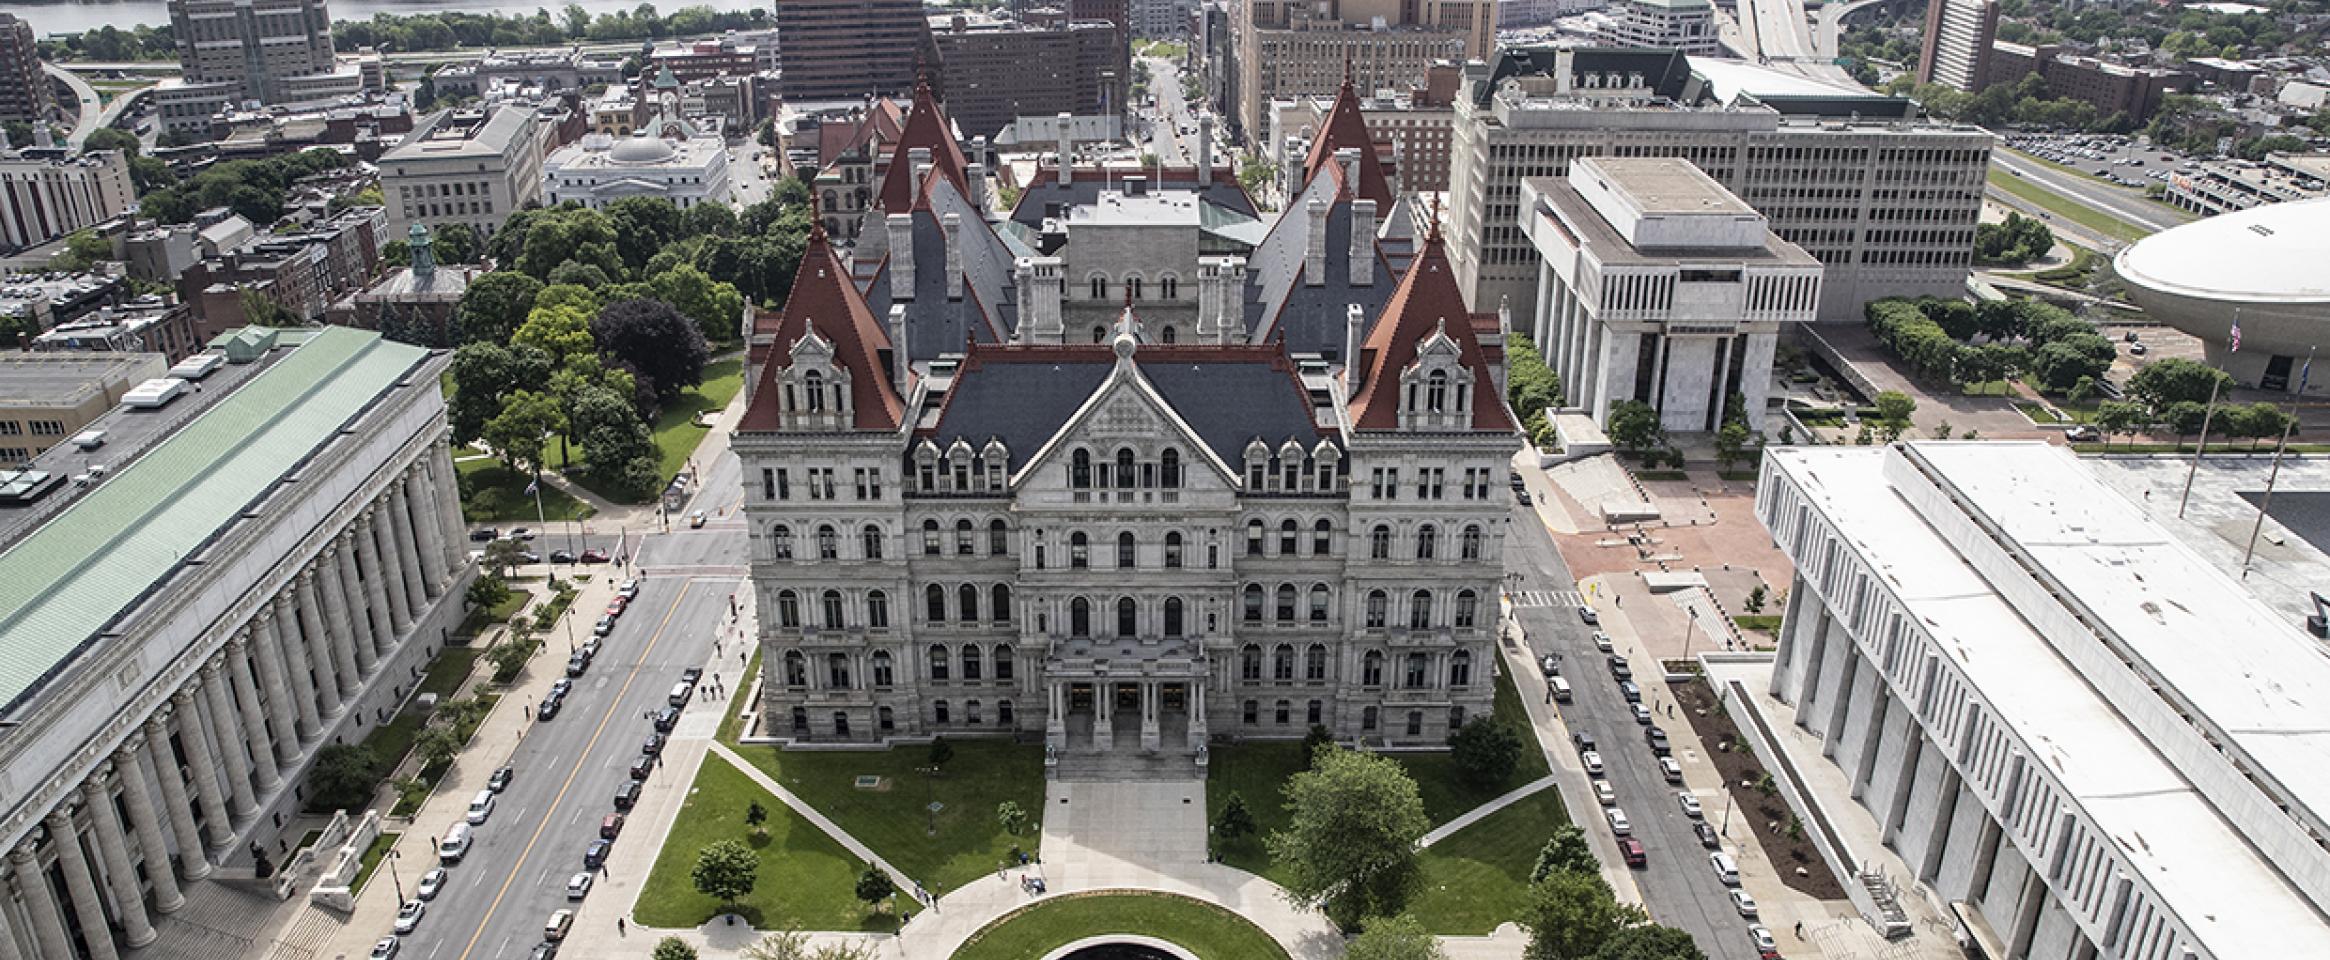 Landscape photo of an aerial view of the New York State Capitol